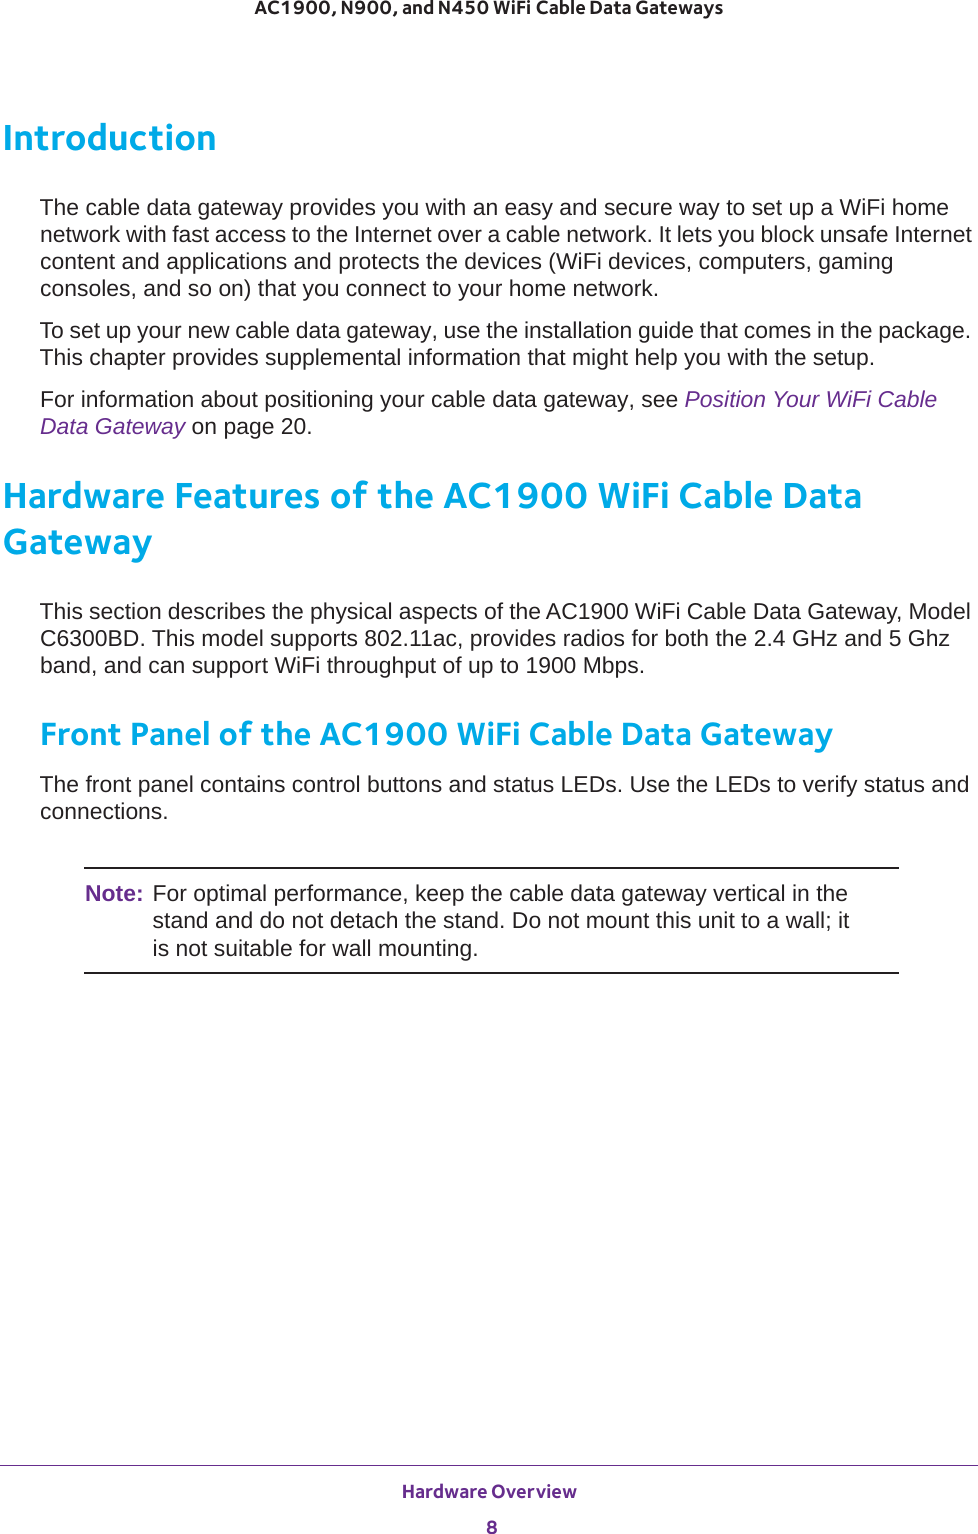 Hardware Overview 8AC1900, N900, and N450 WiFi Cable Data Gateways IntroductionThe cable data gateway provides you with an easy and secure way to set up a WiFi home network with fast access to the Internet over a cable network. It lets you block unsafe Internet content and applications and protects the devices (WiFi devices, computers, gaming consoles, and so on) that you connect to your home network. To set up your new cable data gateway, use the installation guide that comes in the package. This chapter provides supplemental information that might help you with the setup.For information about positioning your cable data gateway, see Position Your WiFi Cable Data Gateway on page  20.Hardware Features of the AC1900 WiFi Cable Data GatewayThis section describes the physical aspects of the AC1900 WiFi Cable Data Gateway, Model C6300BD. This model supports 802.11ac, provides radios for both the 2.4 GHz and 5 Ghz band, and can support WiFi throughput of up to 1900 Mbps.Front Panel of the AC1900 WiFi Cable Data GatewayThe front panel contains control buttons and status LEDs. Use the LEDs to verify status and connections. Note: For optimal performance, keep the cable data gateway vertical in the stand and do not detach the stand. Do not mount this unit to a wall; it is not suitable for wall mounting.